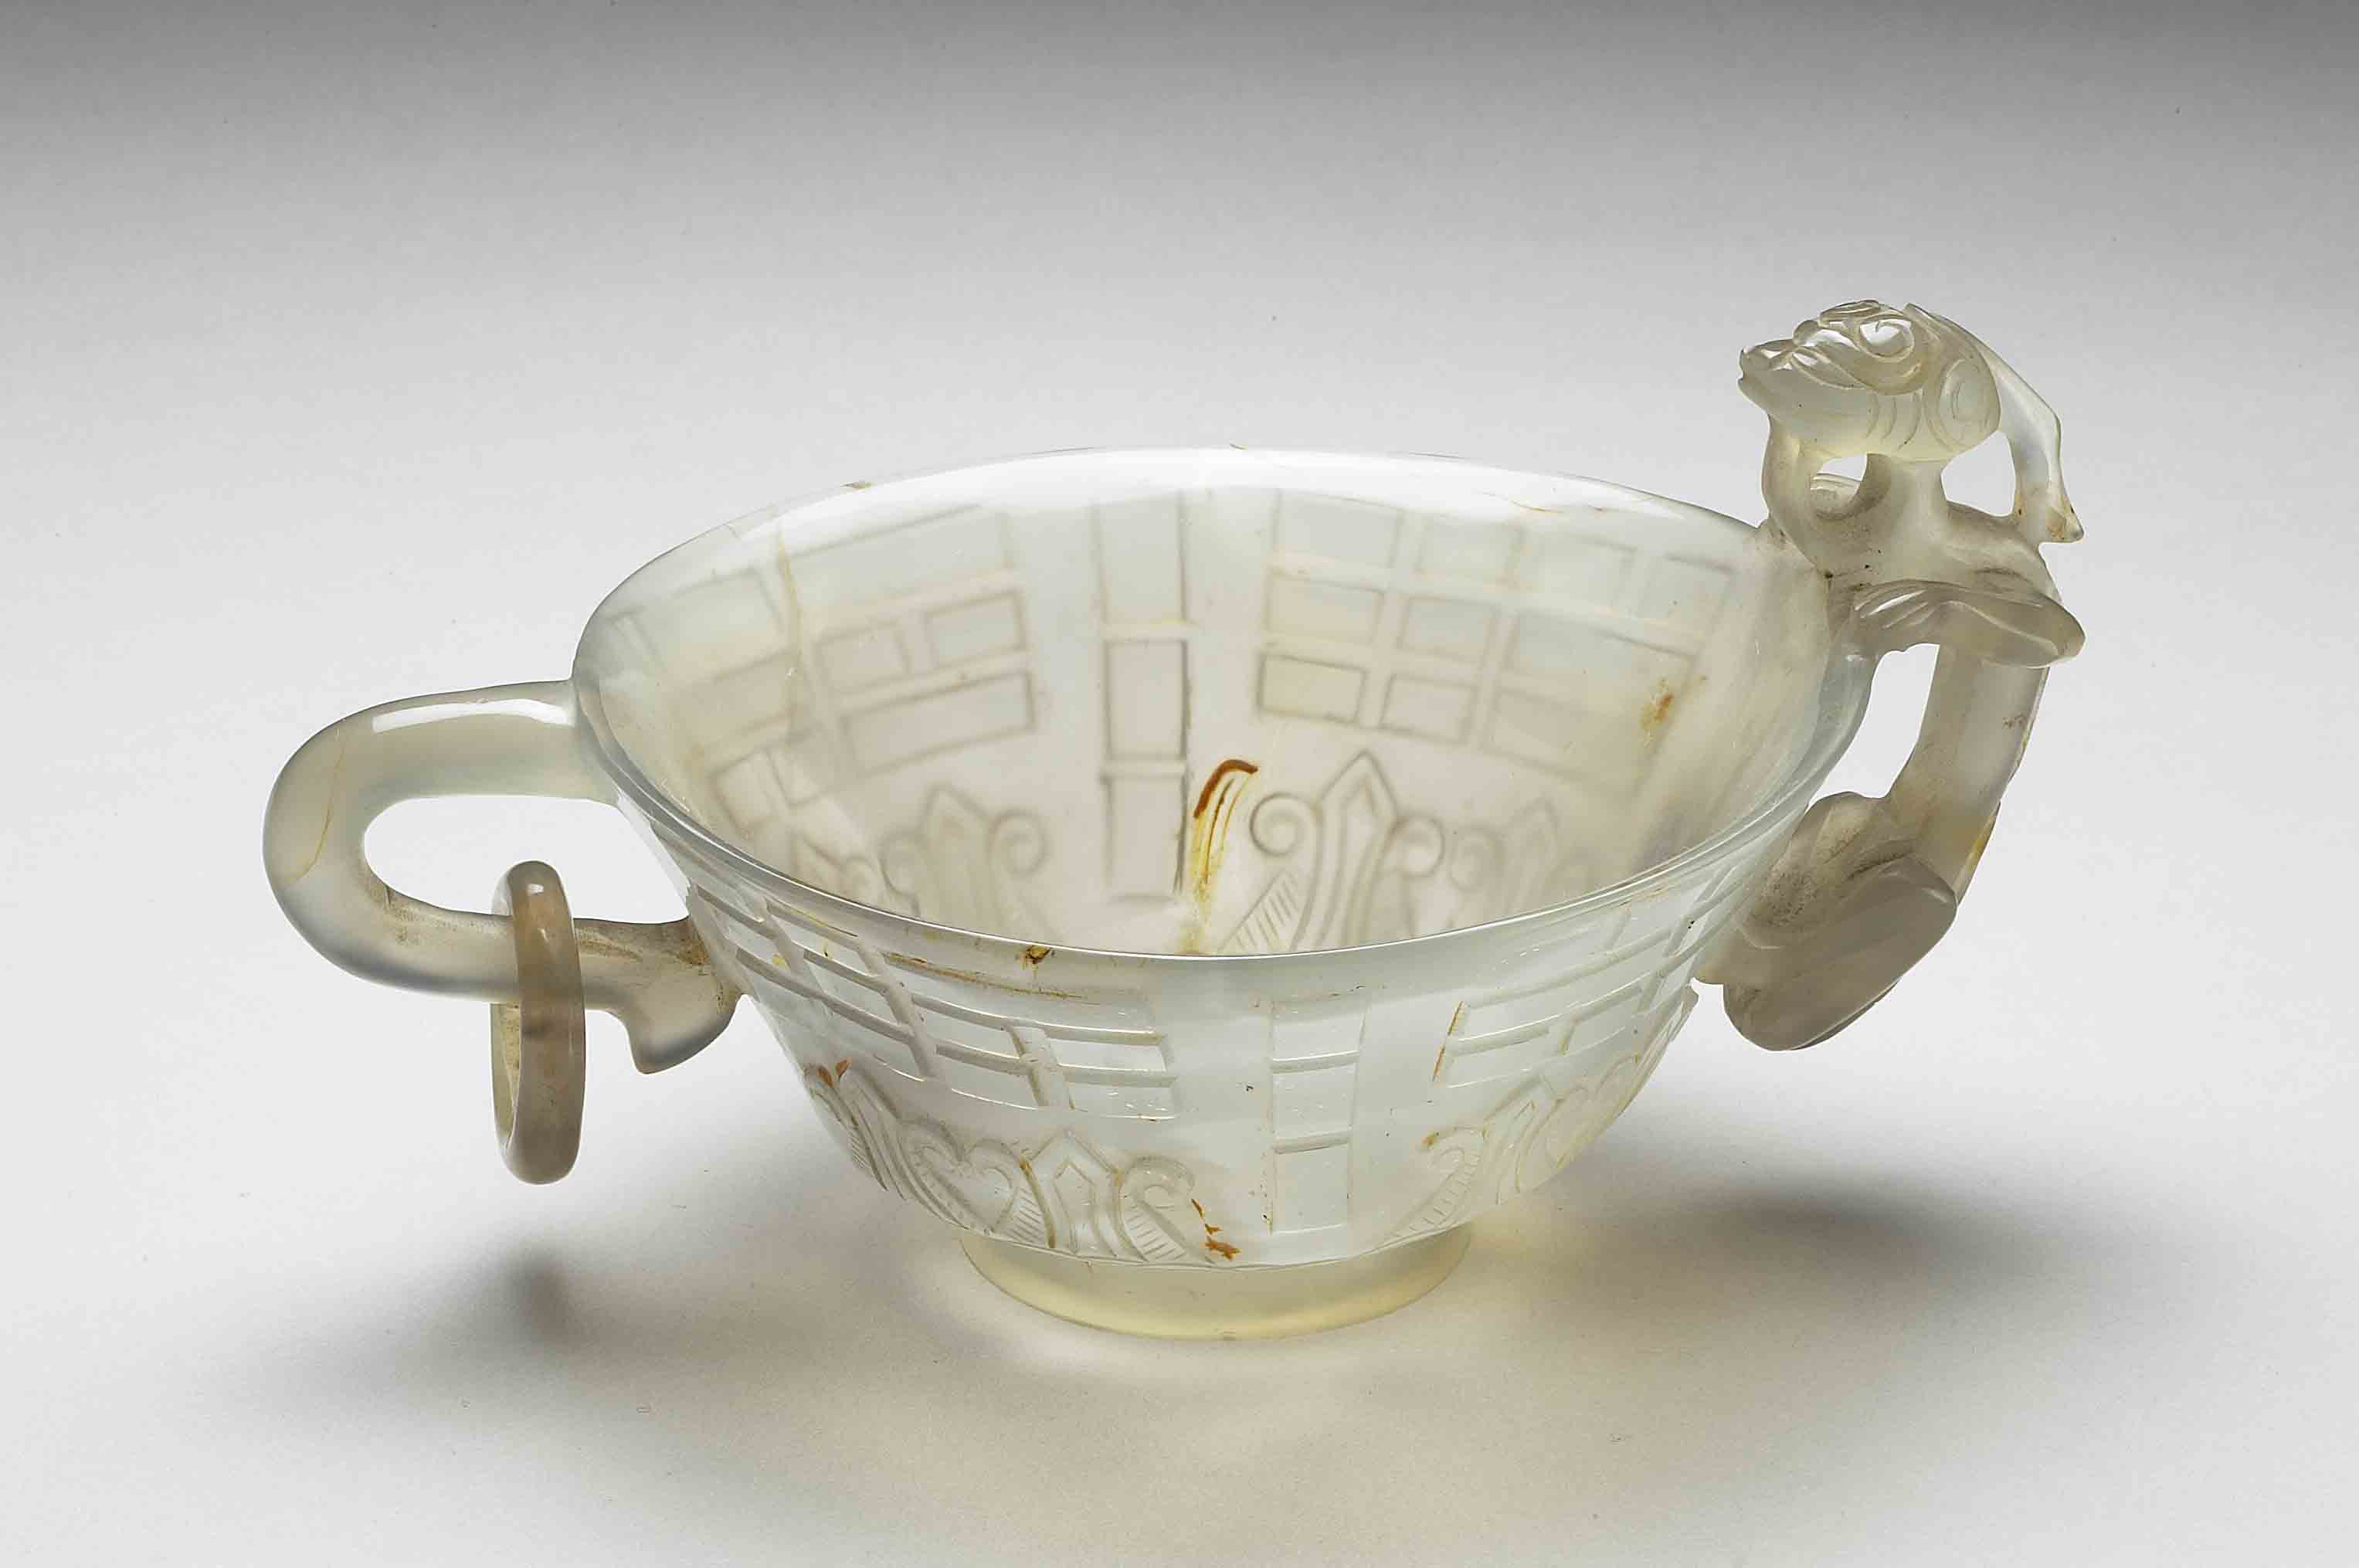 Agate cups, a saucer and a tray with Bagua motif